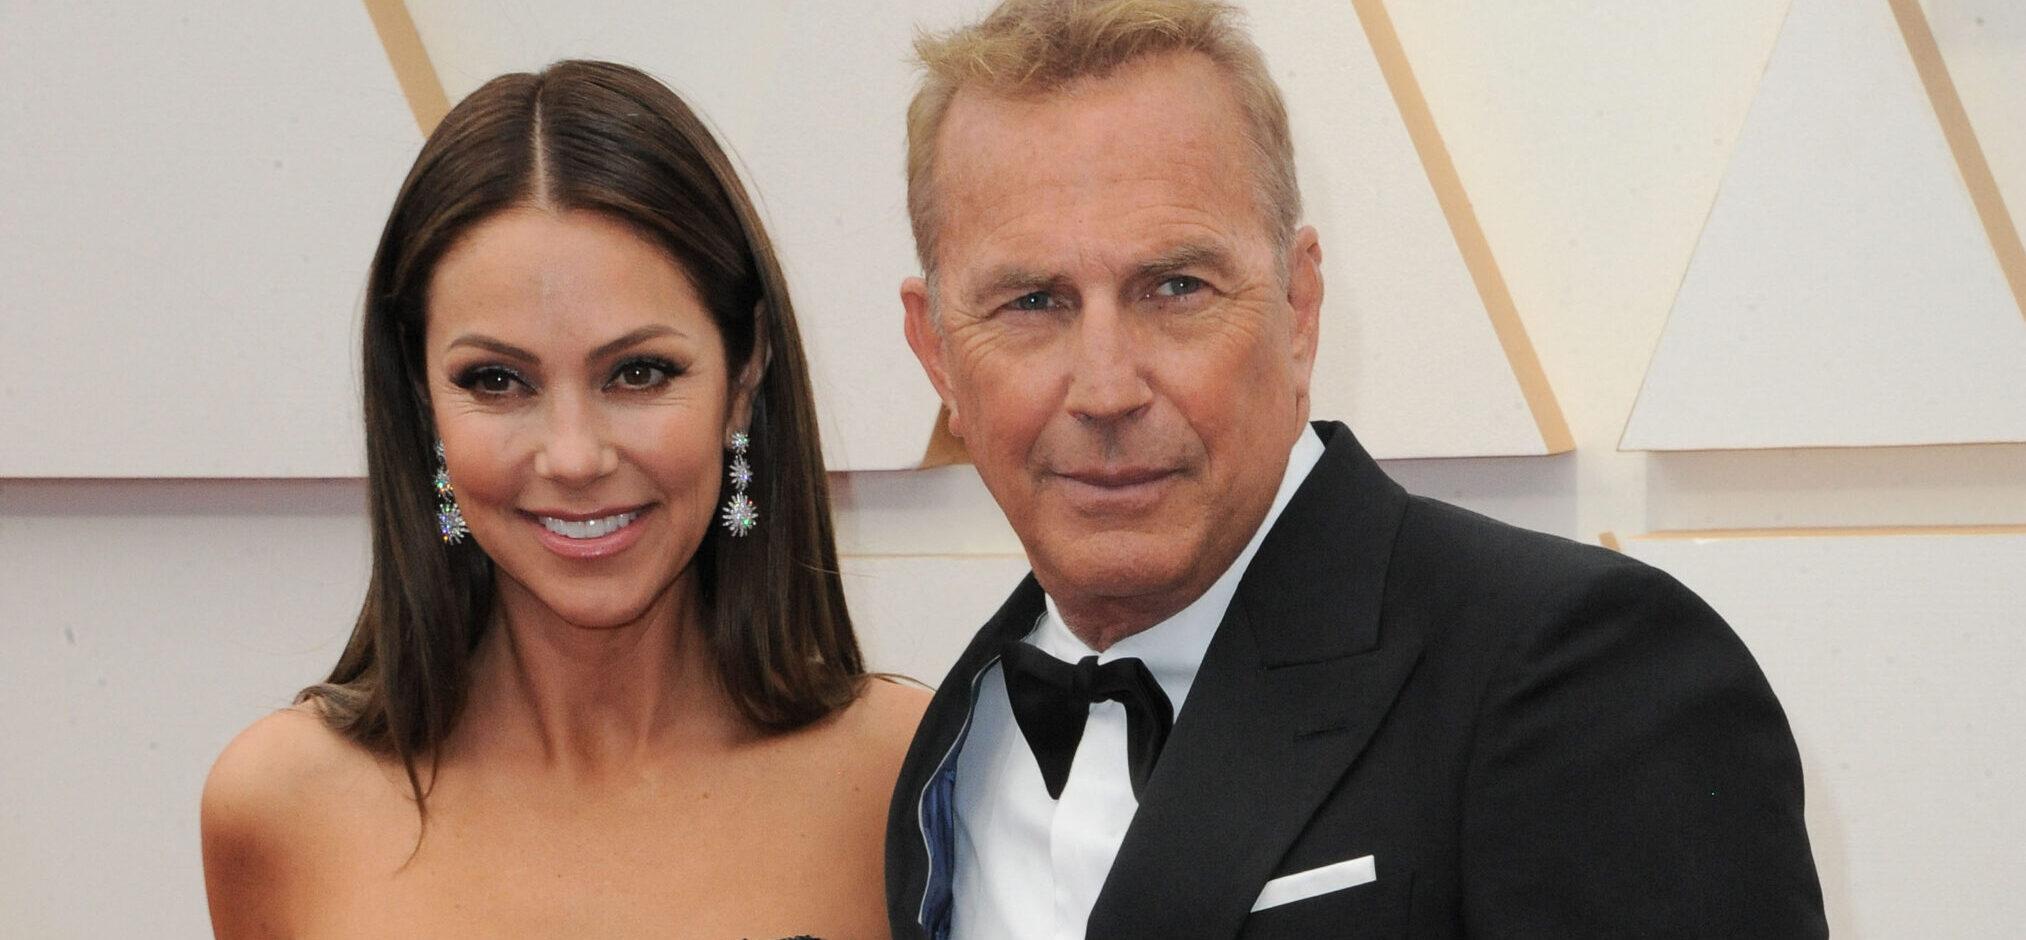 Kevin Costner’s Ex-Wife Wants Child Support To Cover Luxury Private Trips For Her & Kids